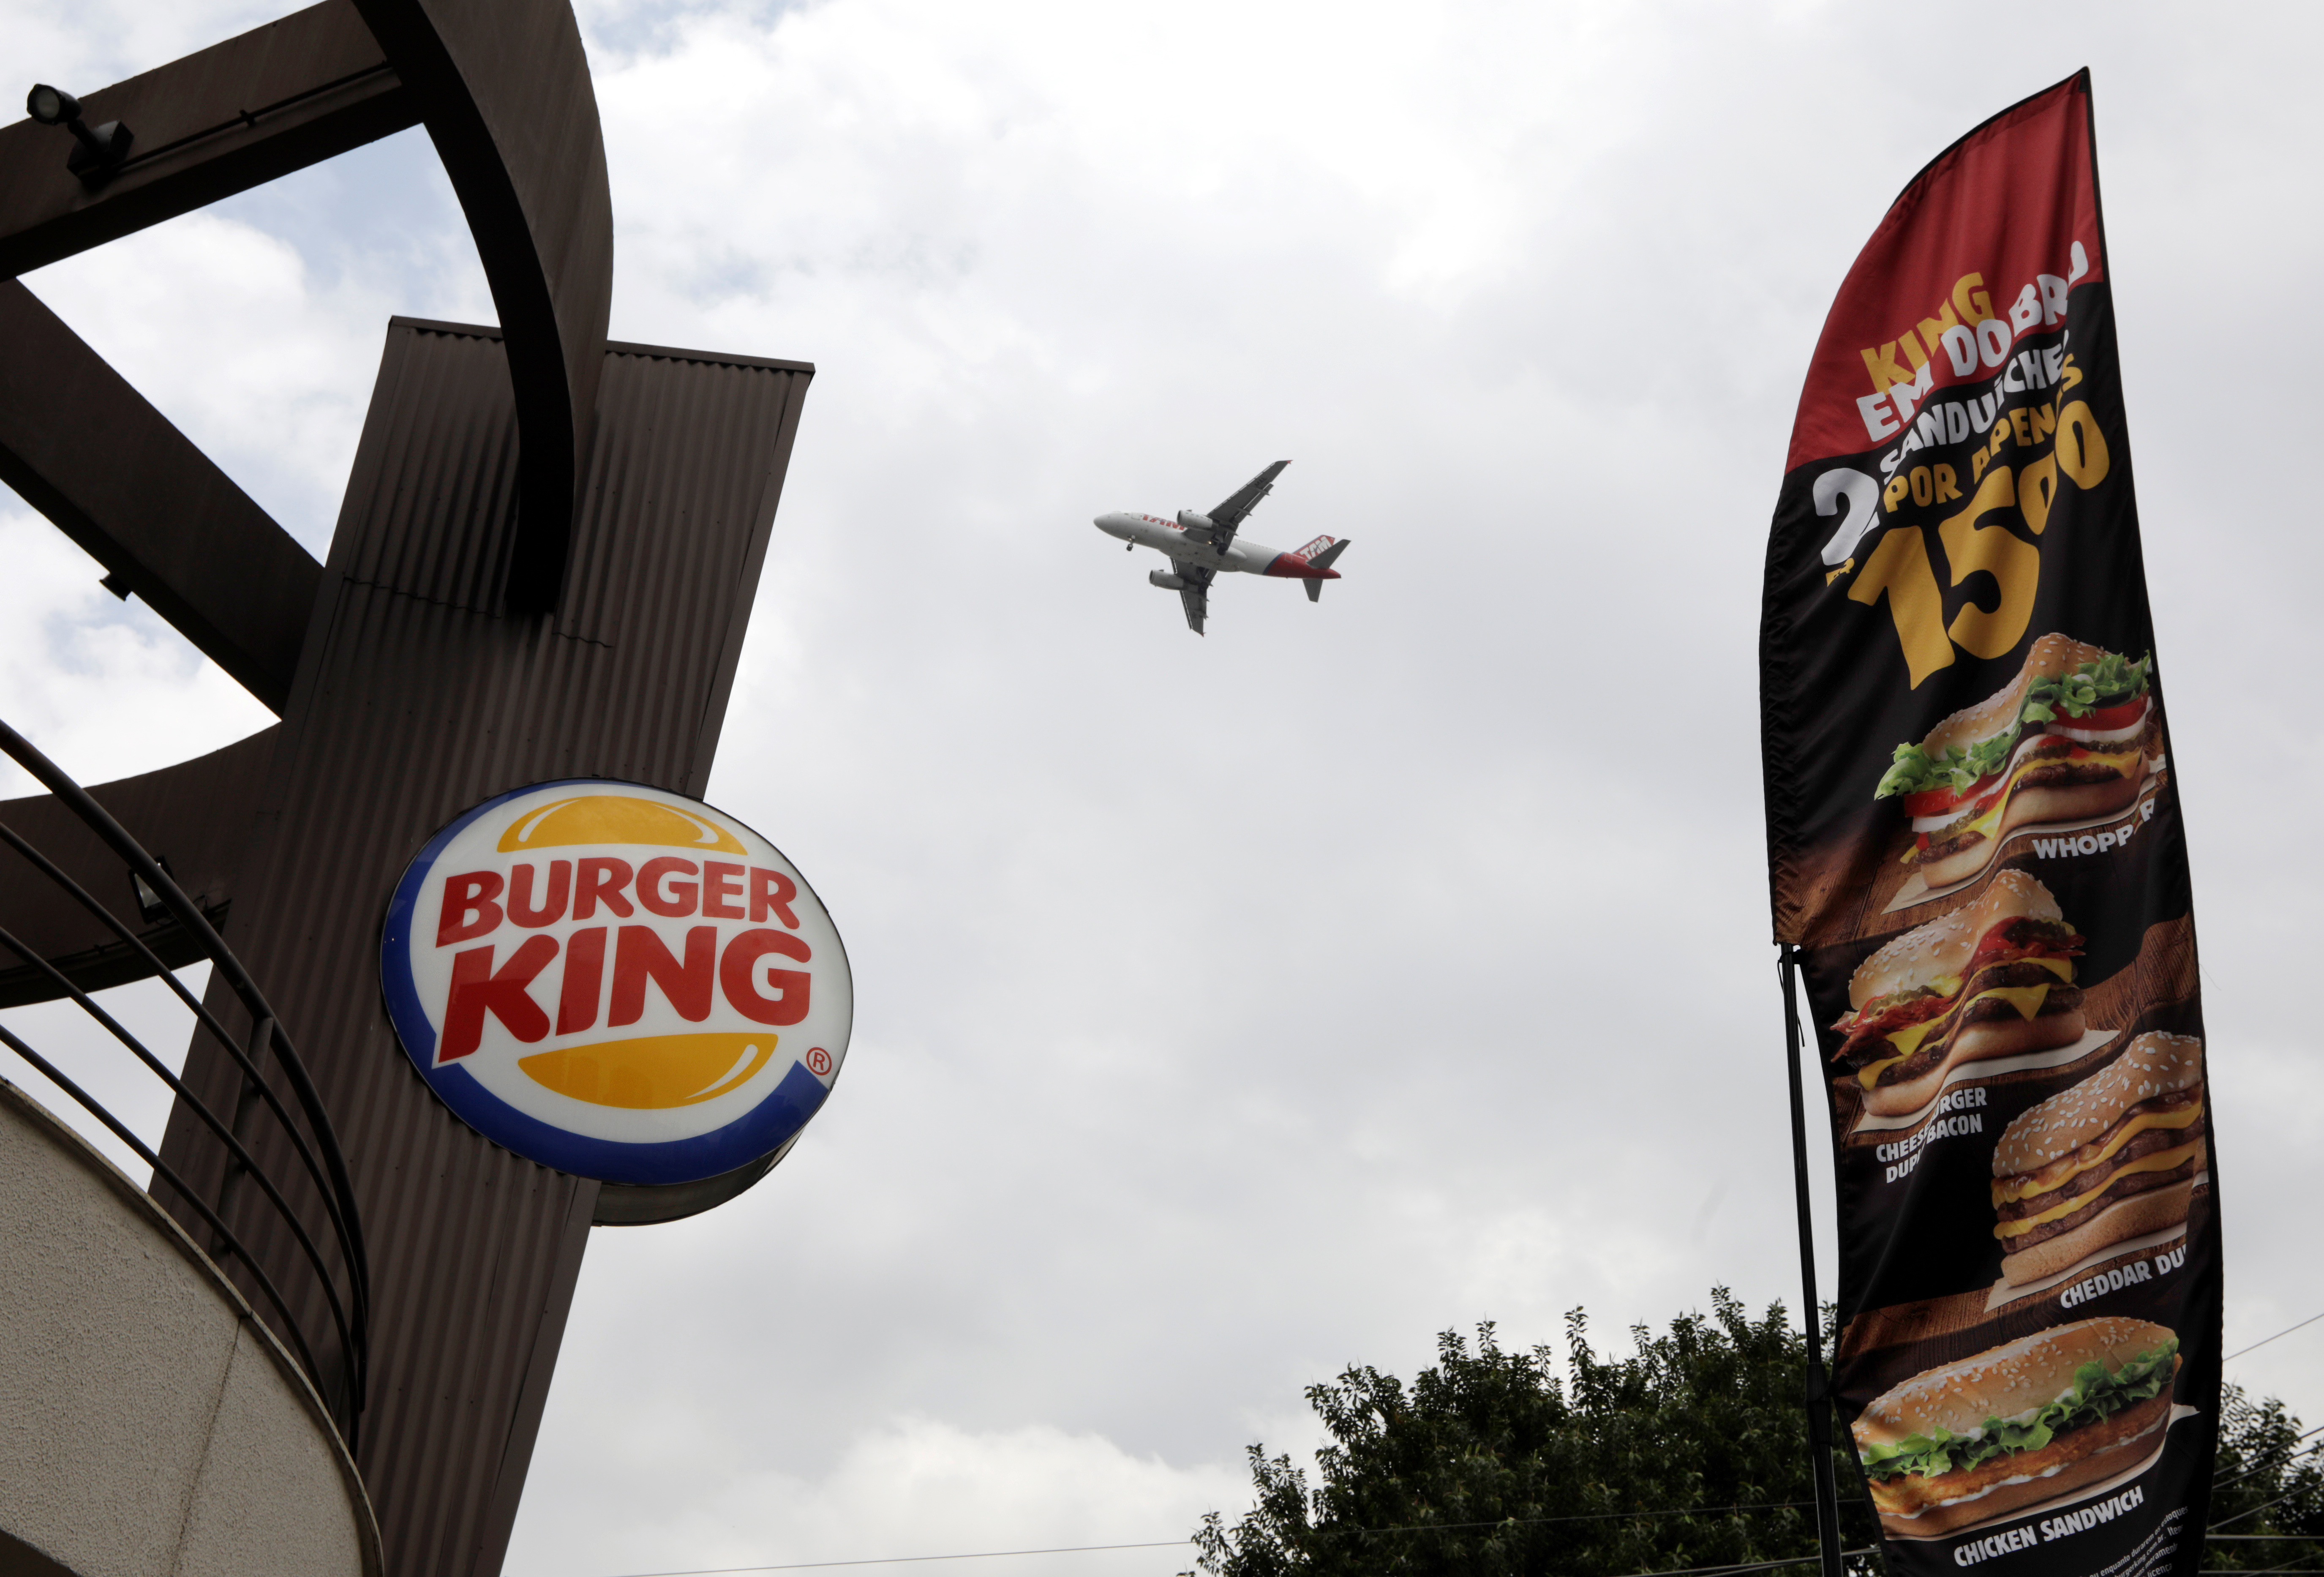 A Burger King restaurant is seen on a main street in Sao Paulo